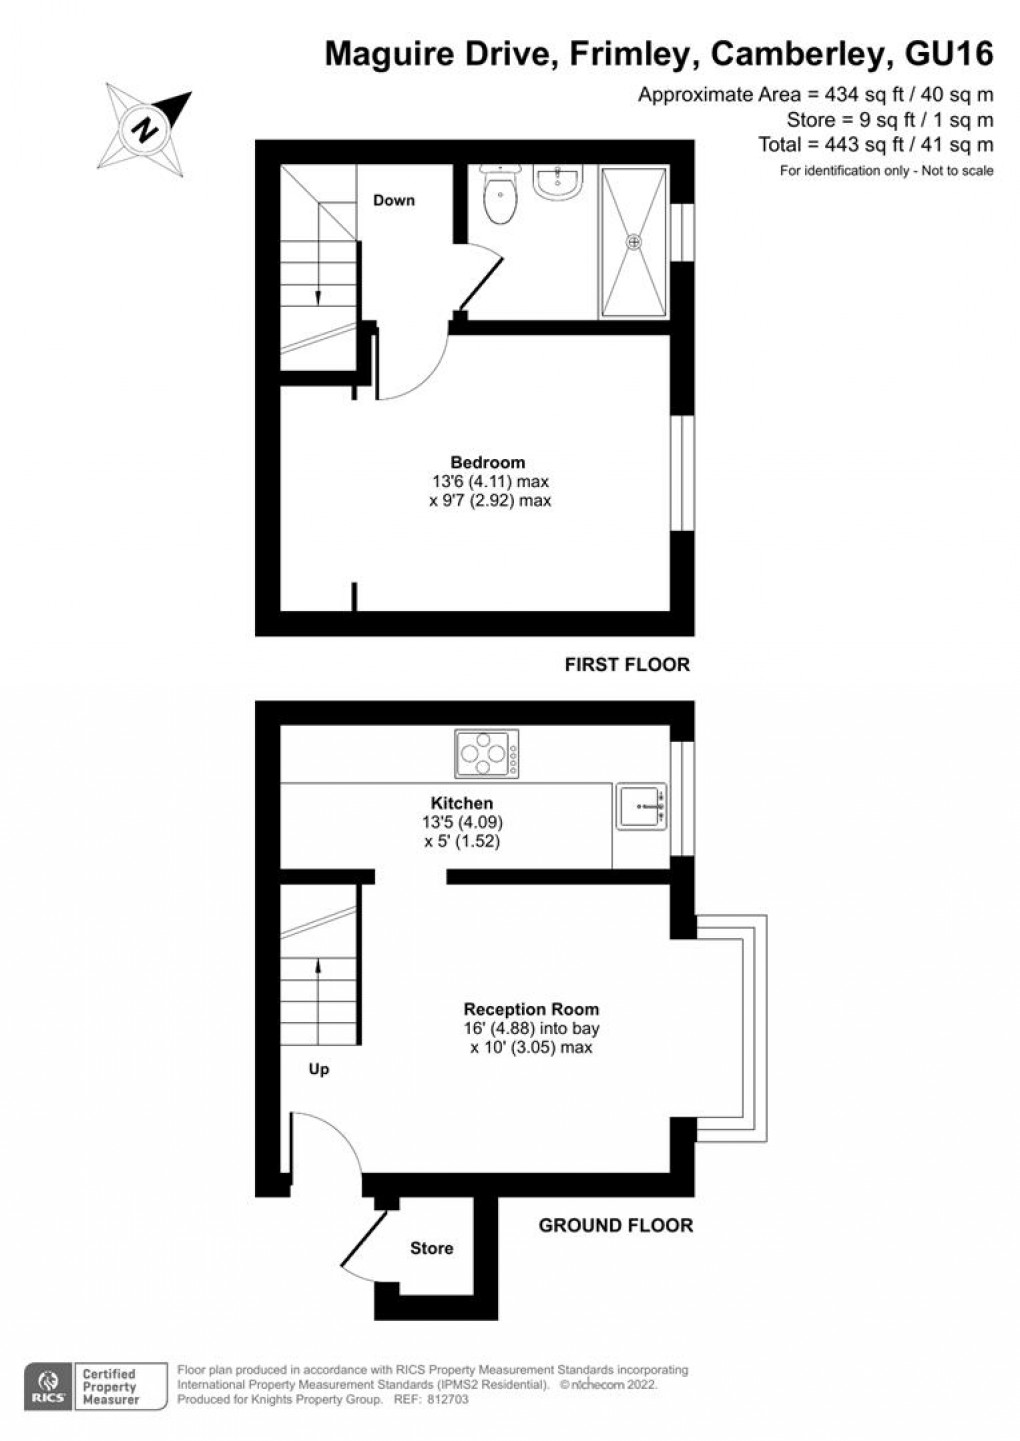 Floorplan for Maguire Drive, Frimley, Camberley